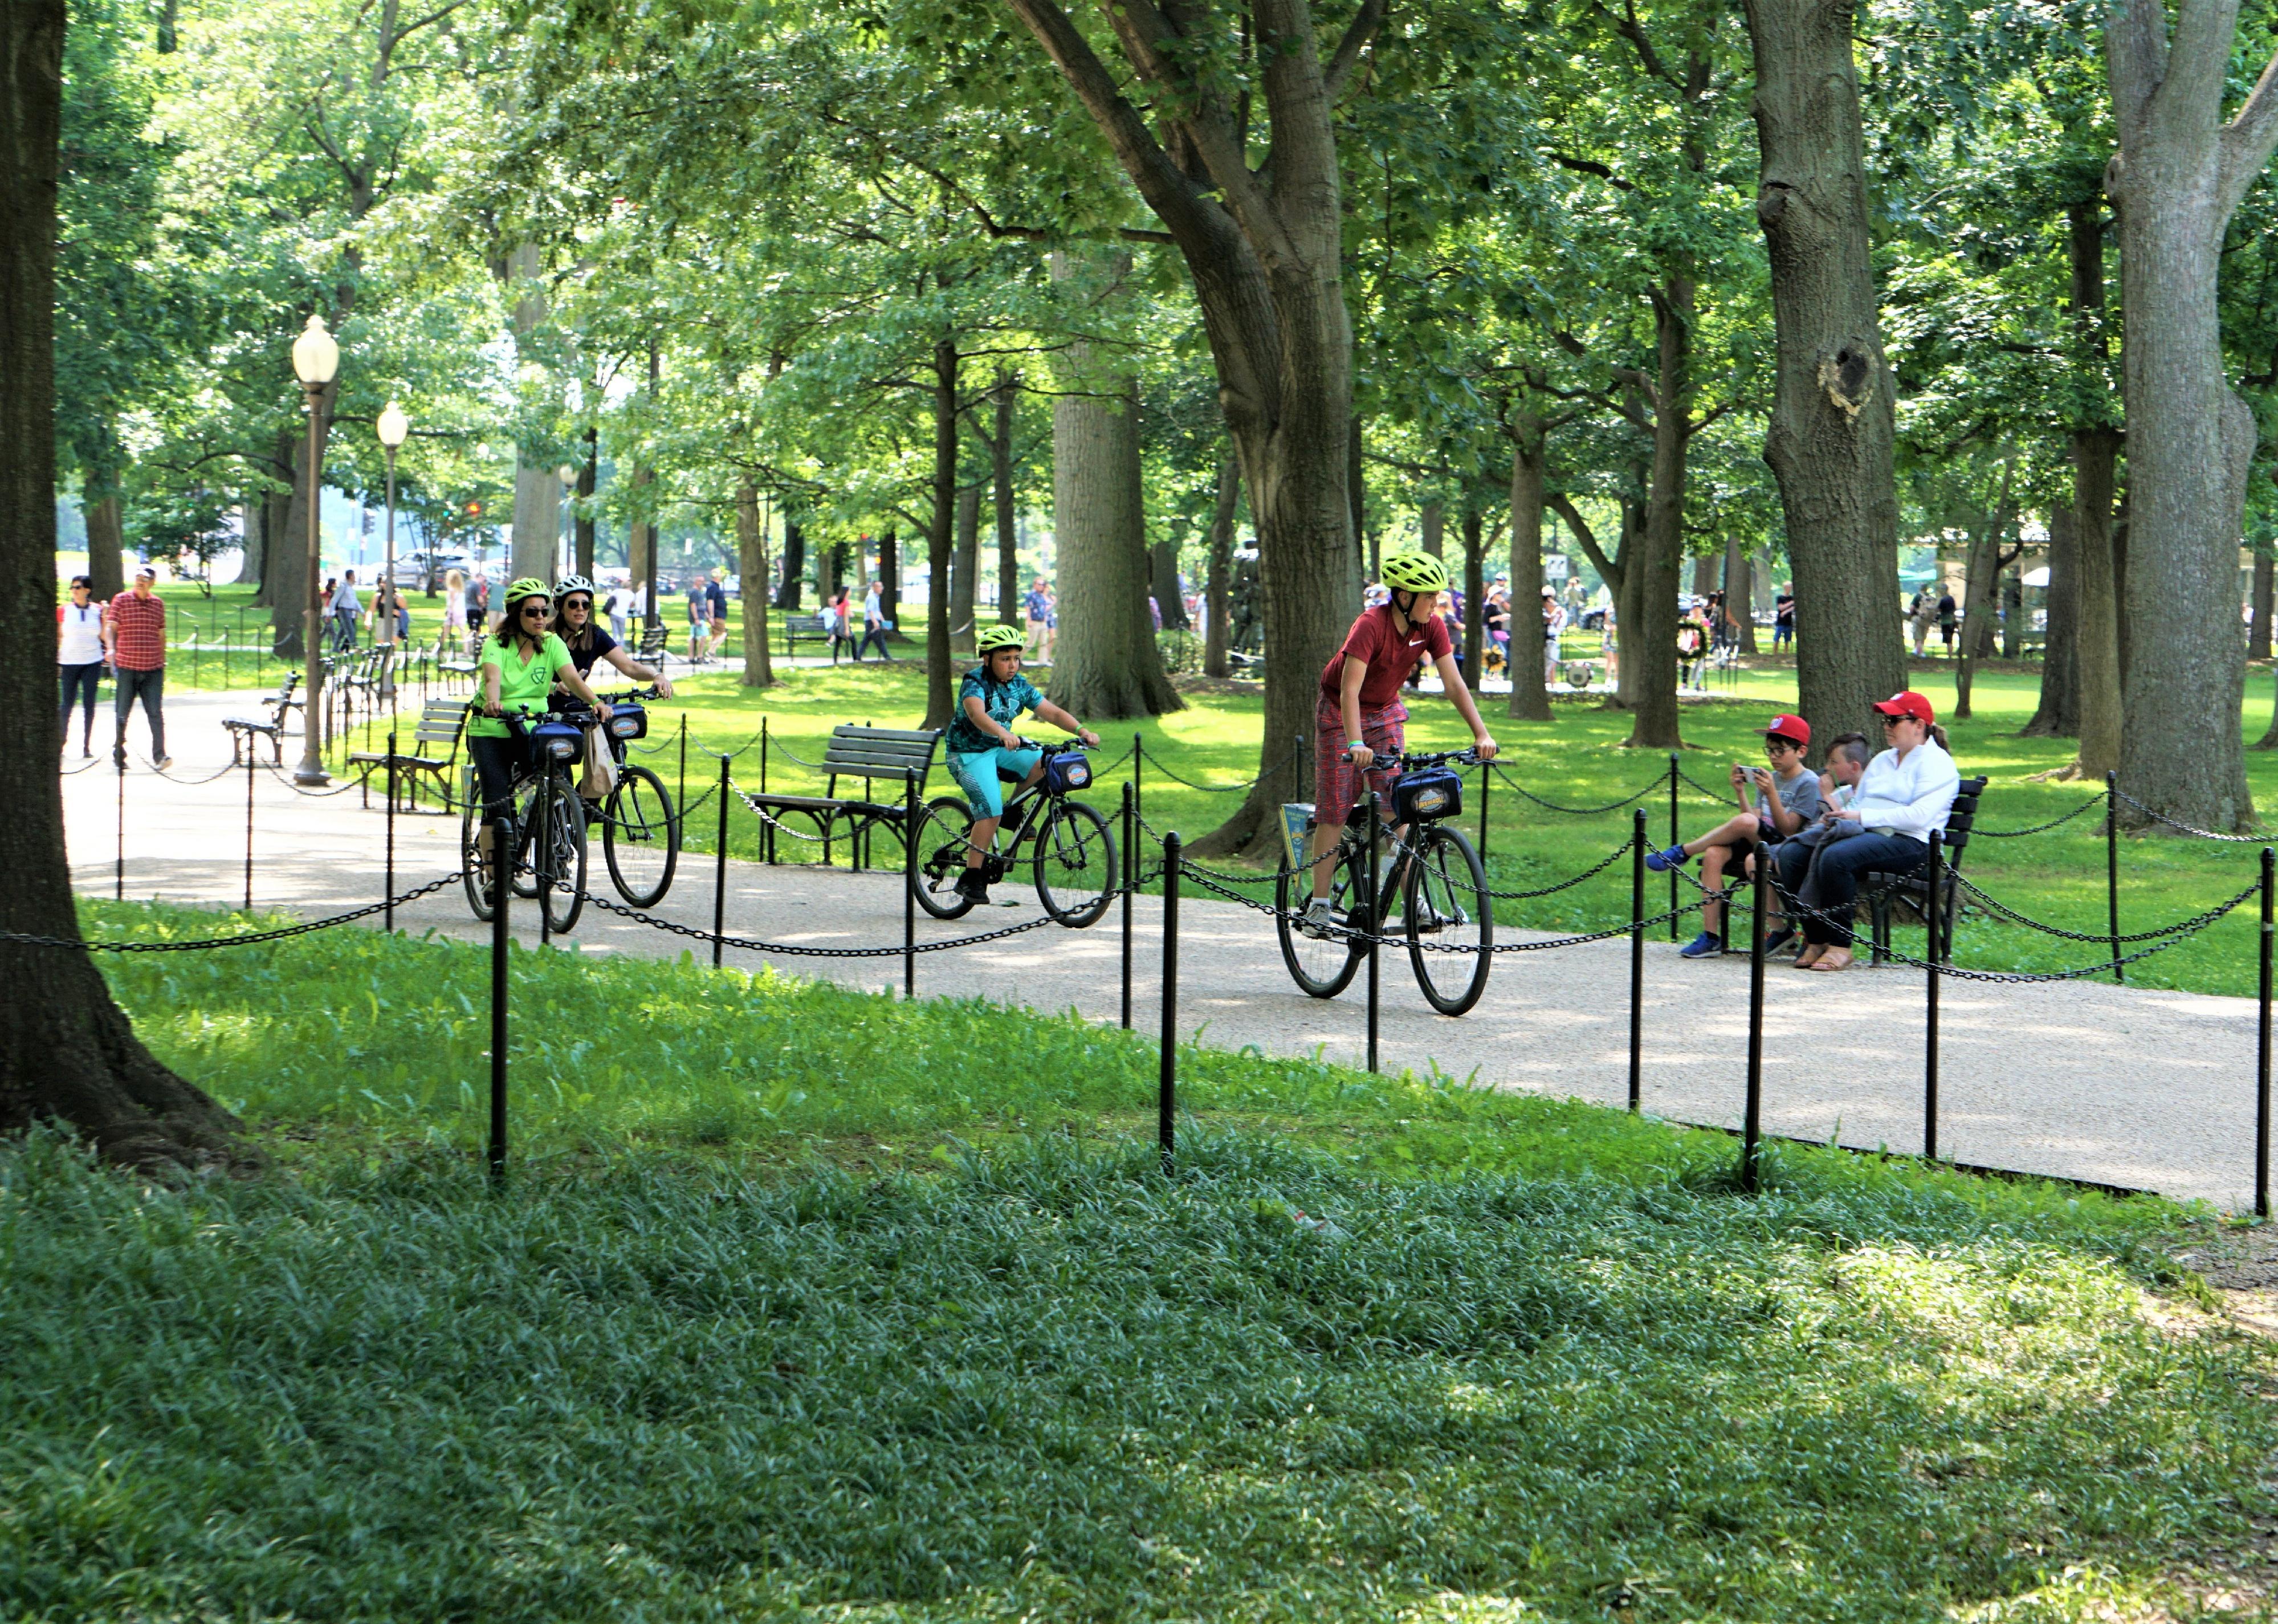 A group of tourists riding the bicycles on the pathway in the park of National Mall in D.C.